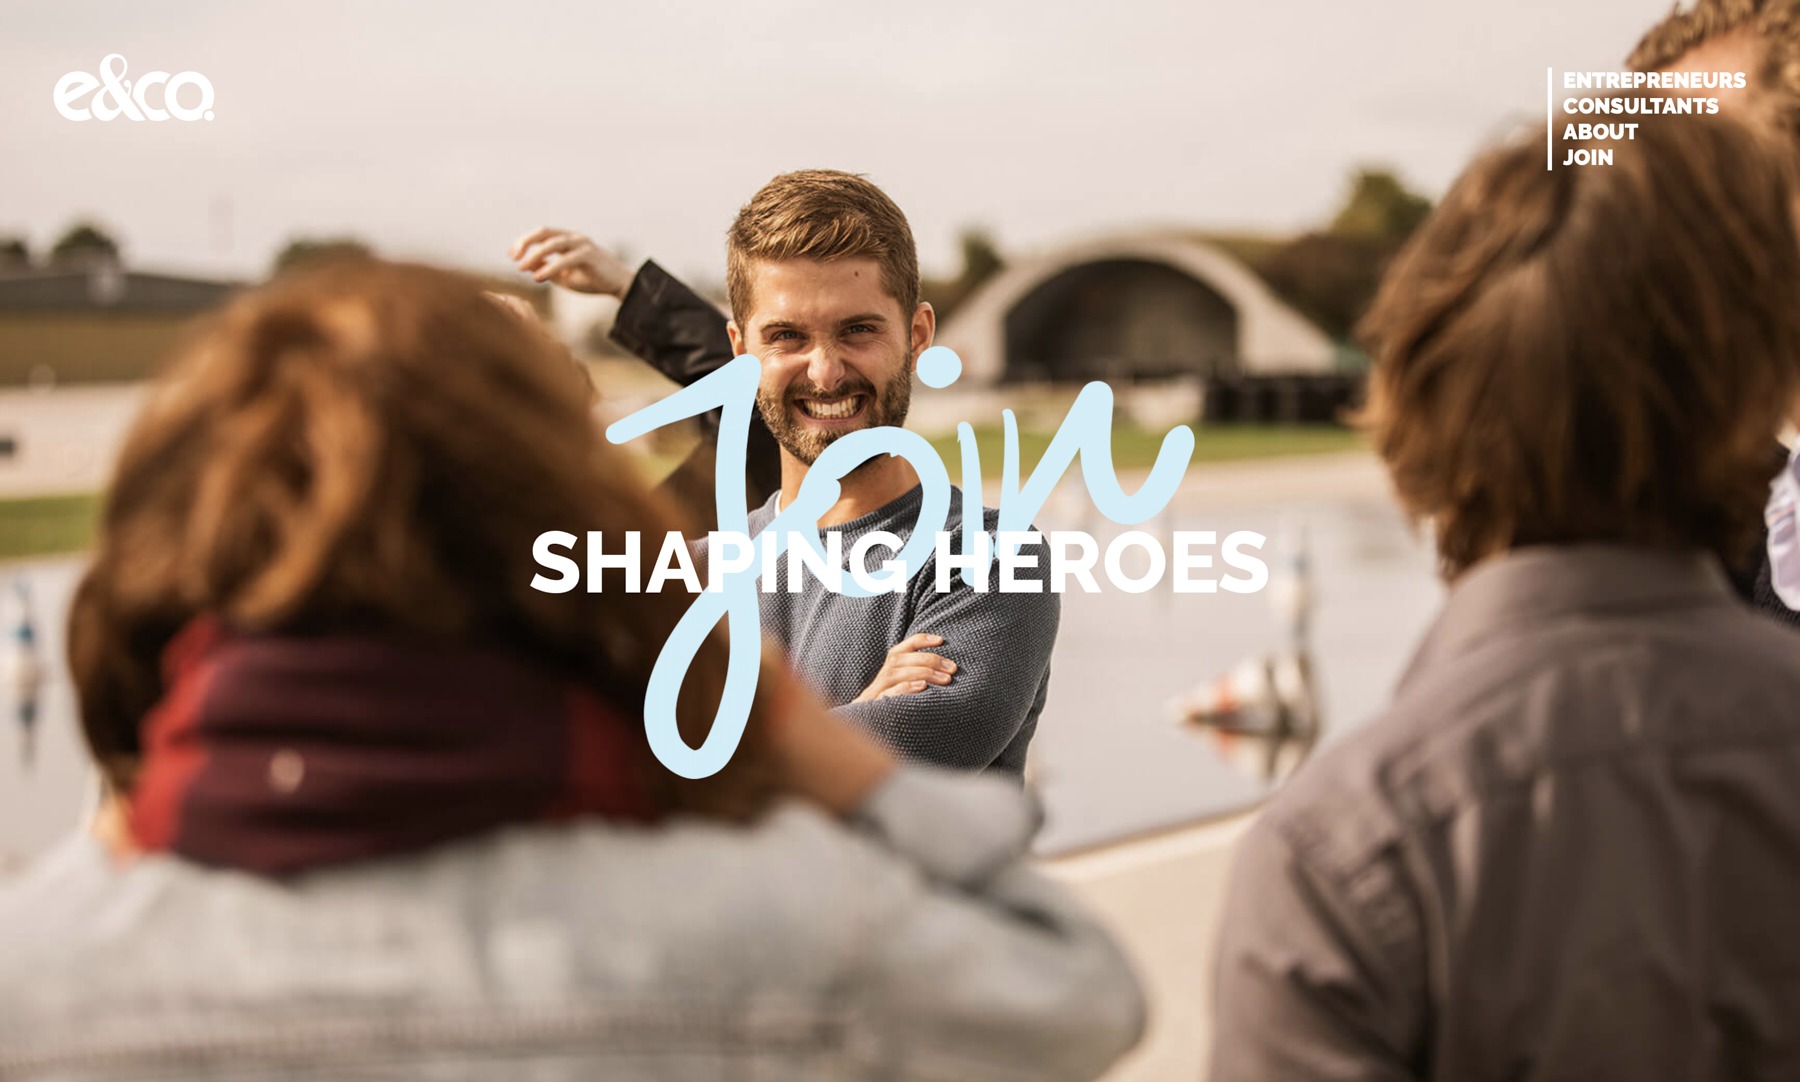 eandco campaign shaping heroes (21 images) by Mike Meyer Photography